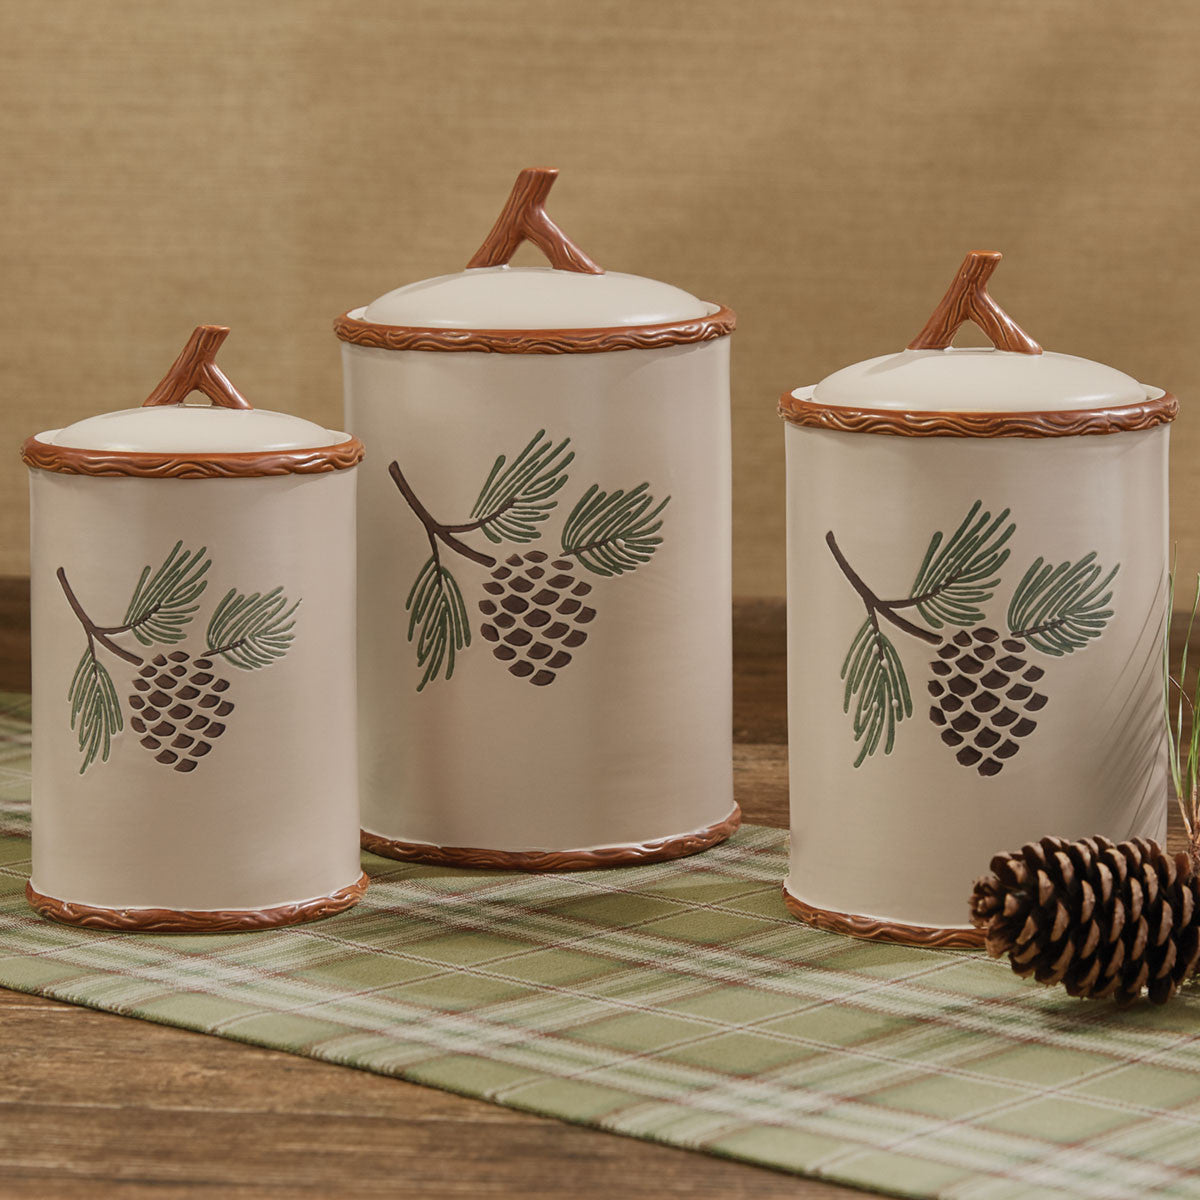 Pinecroft Canisters - Set of 3 Canister Park Designs